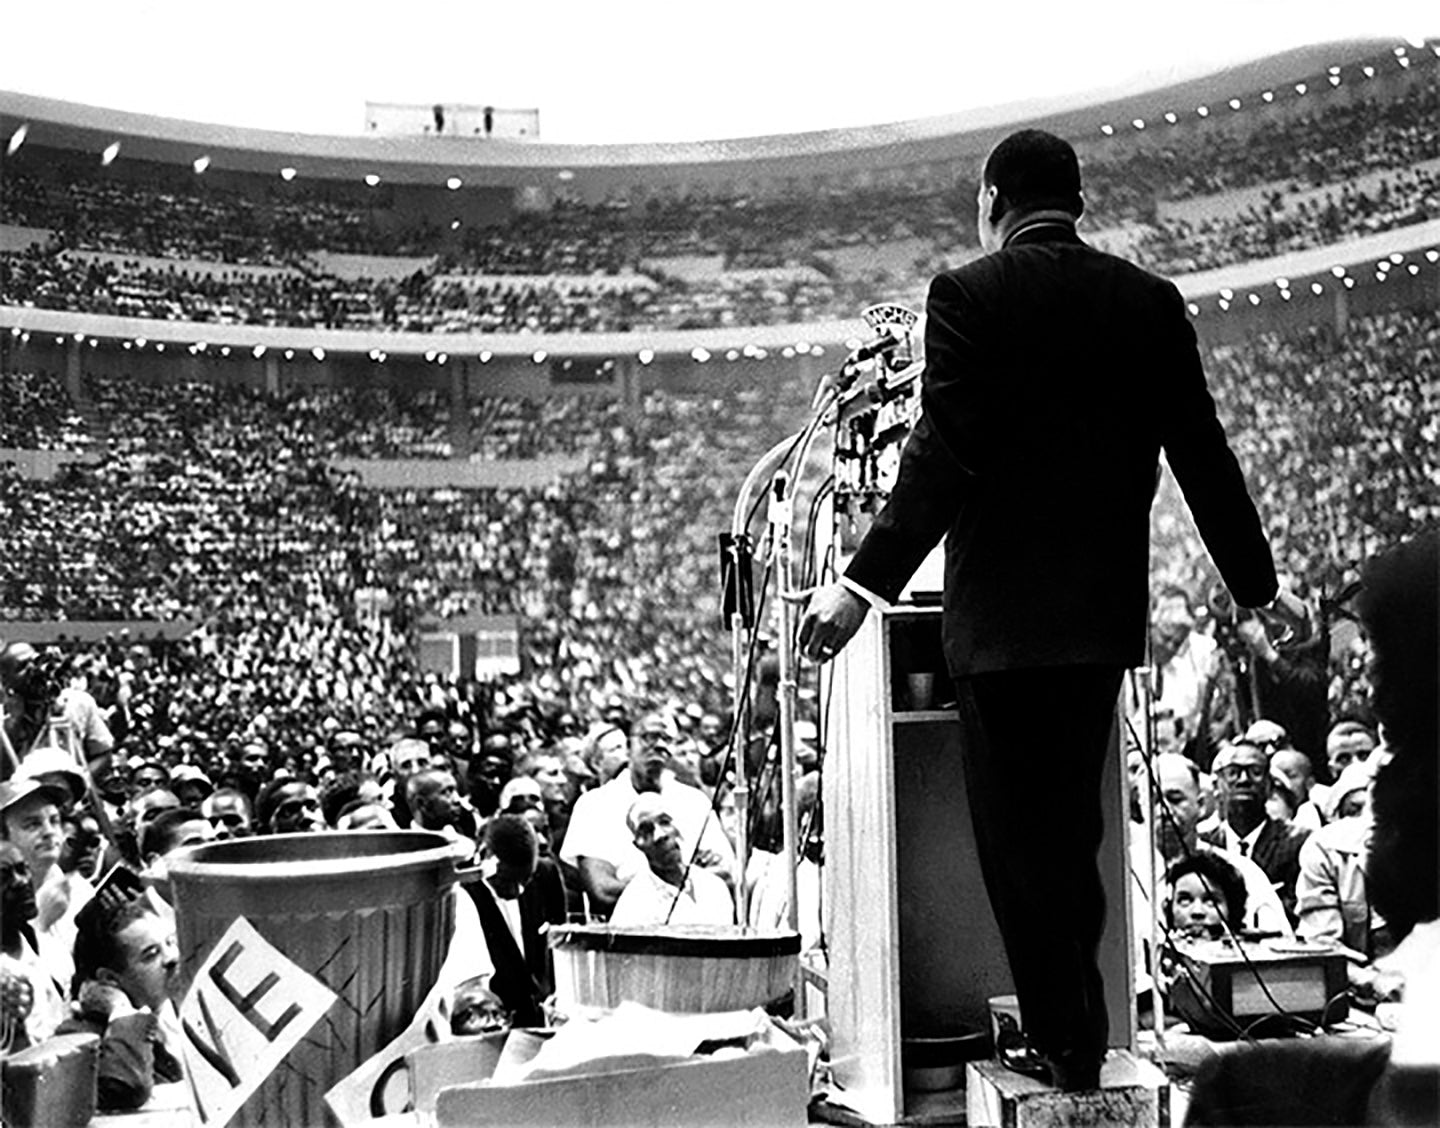 MLK "I Have a Dream" speech Cobo Arena June 23, 1963 - Officially Licensed Detroit News Canvas